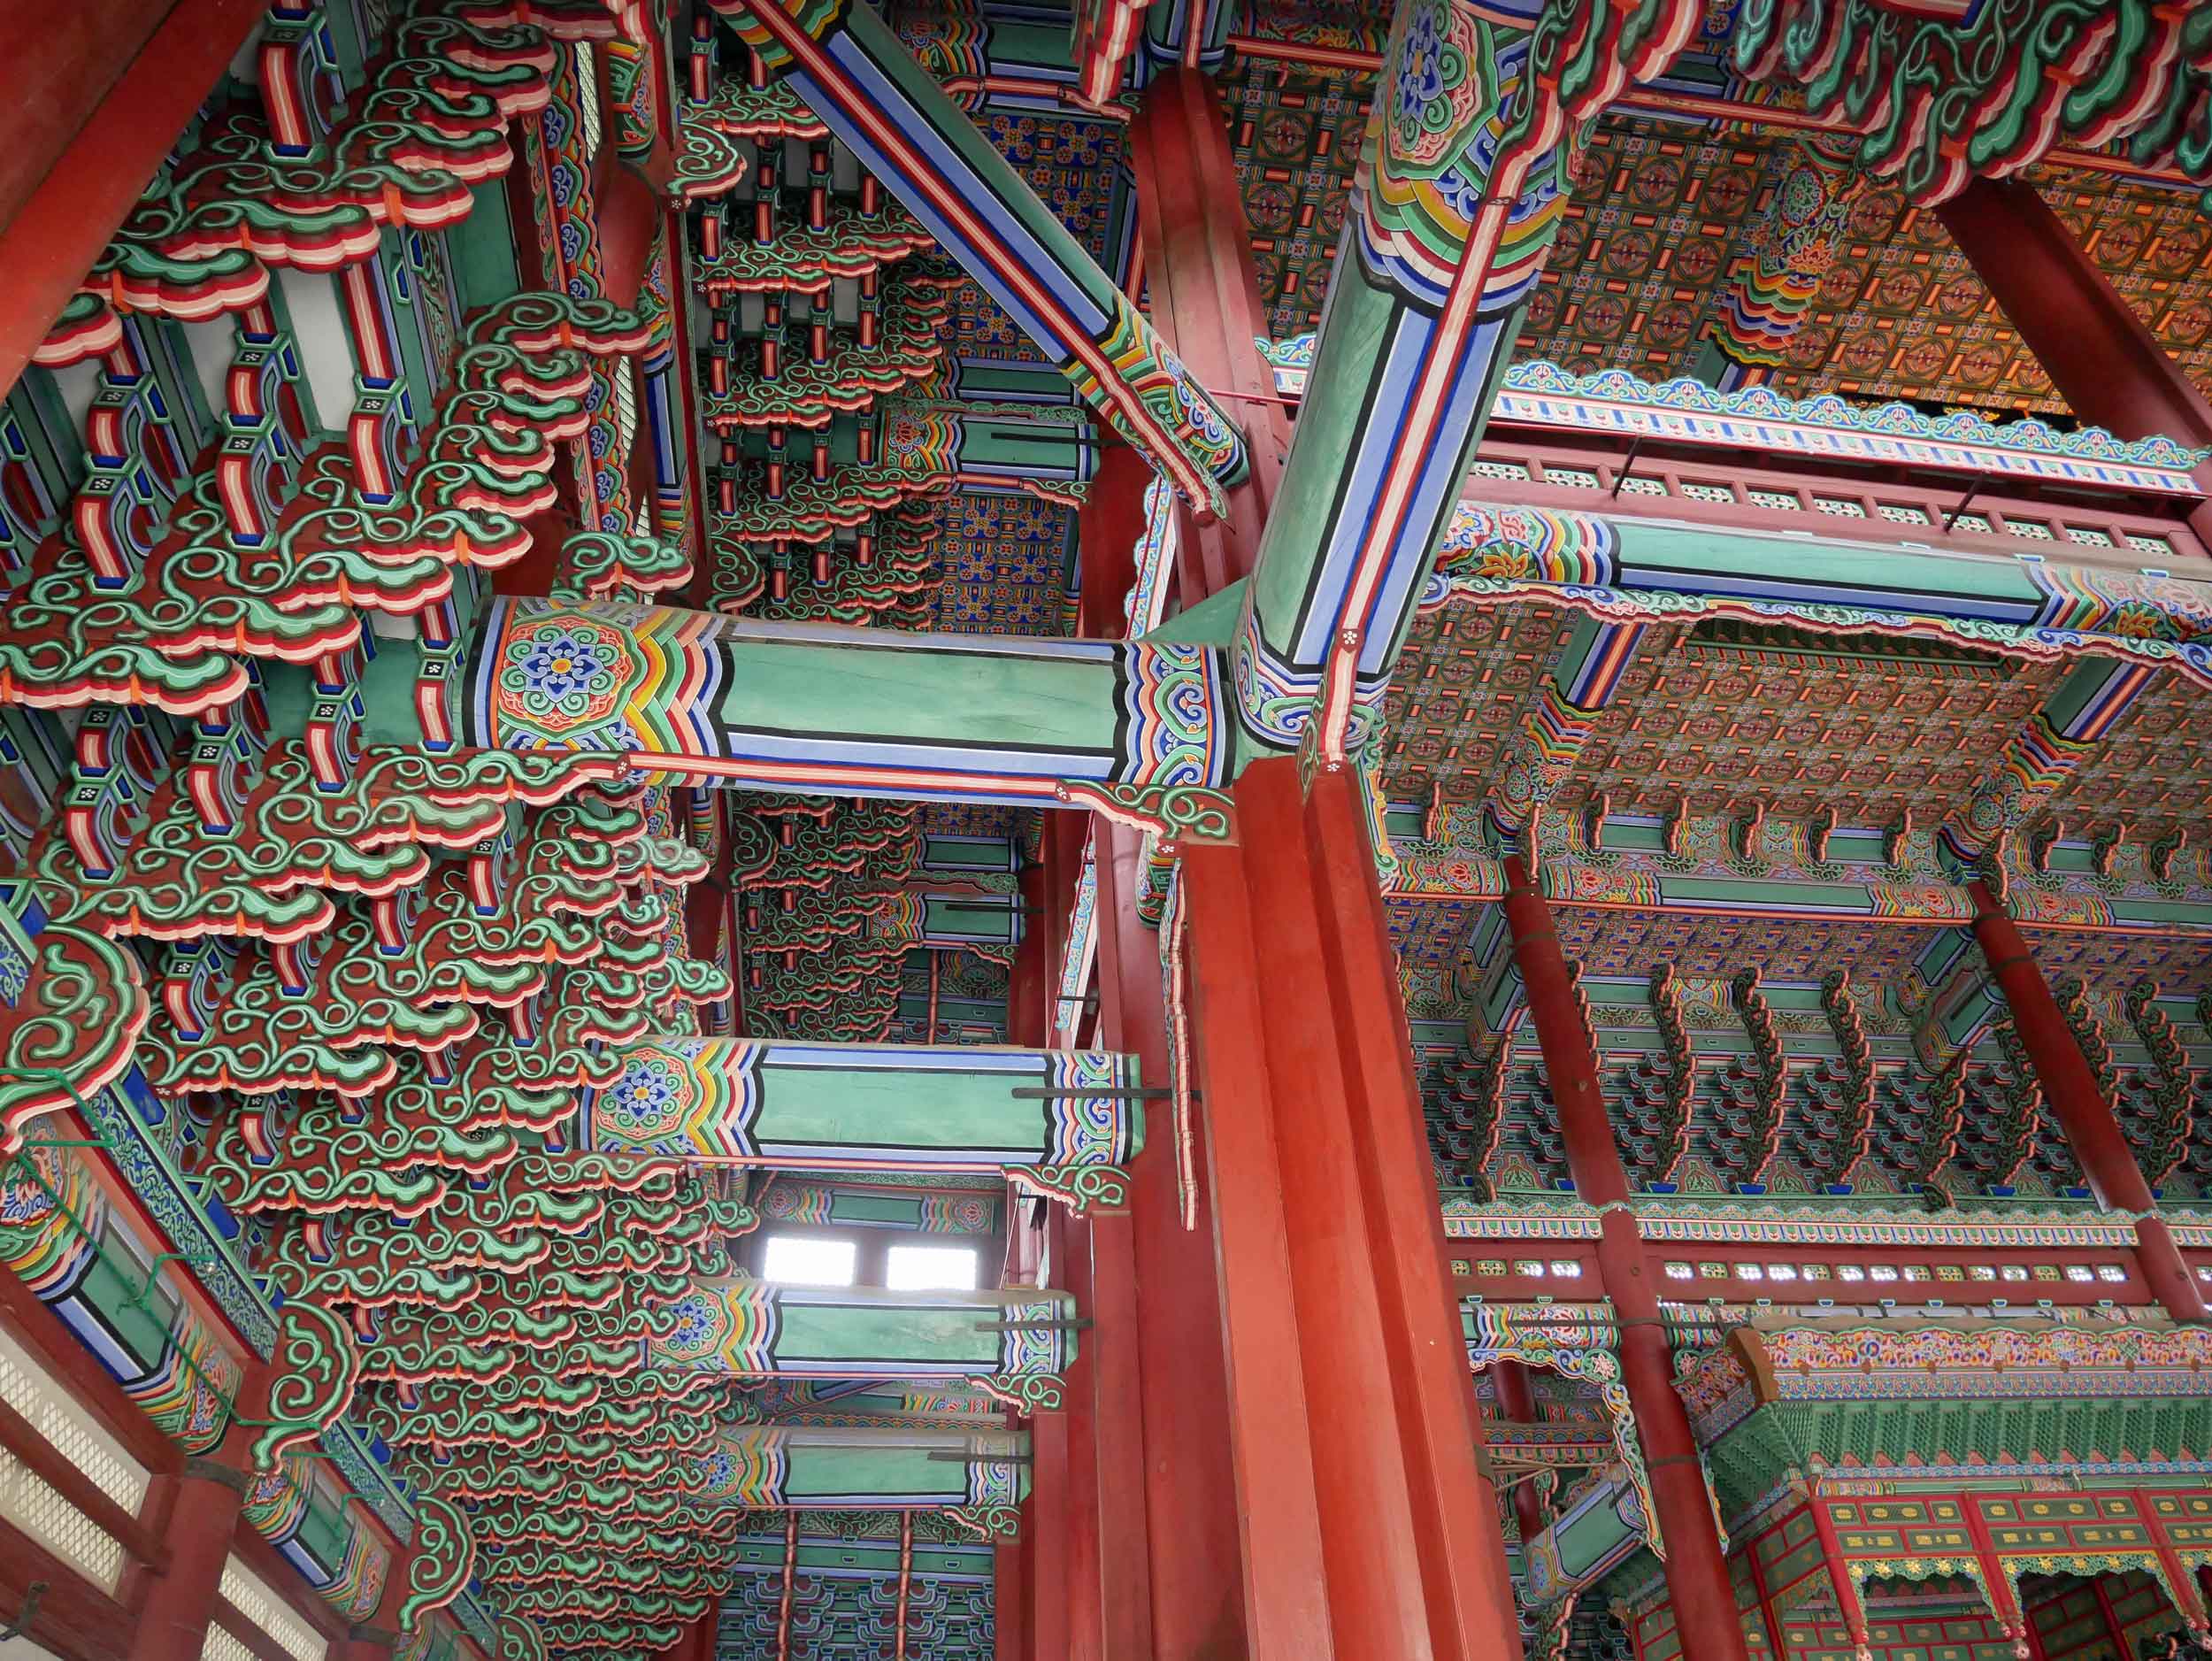  The colorful pillars of the palace halls appeared 3D thanks to sophisticated painting techniques.&nbsp; 